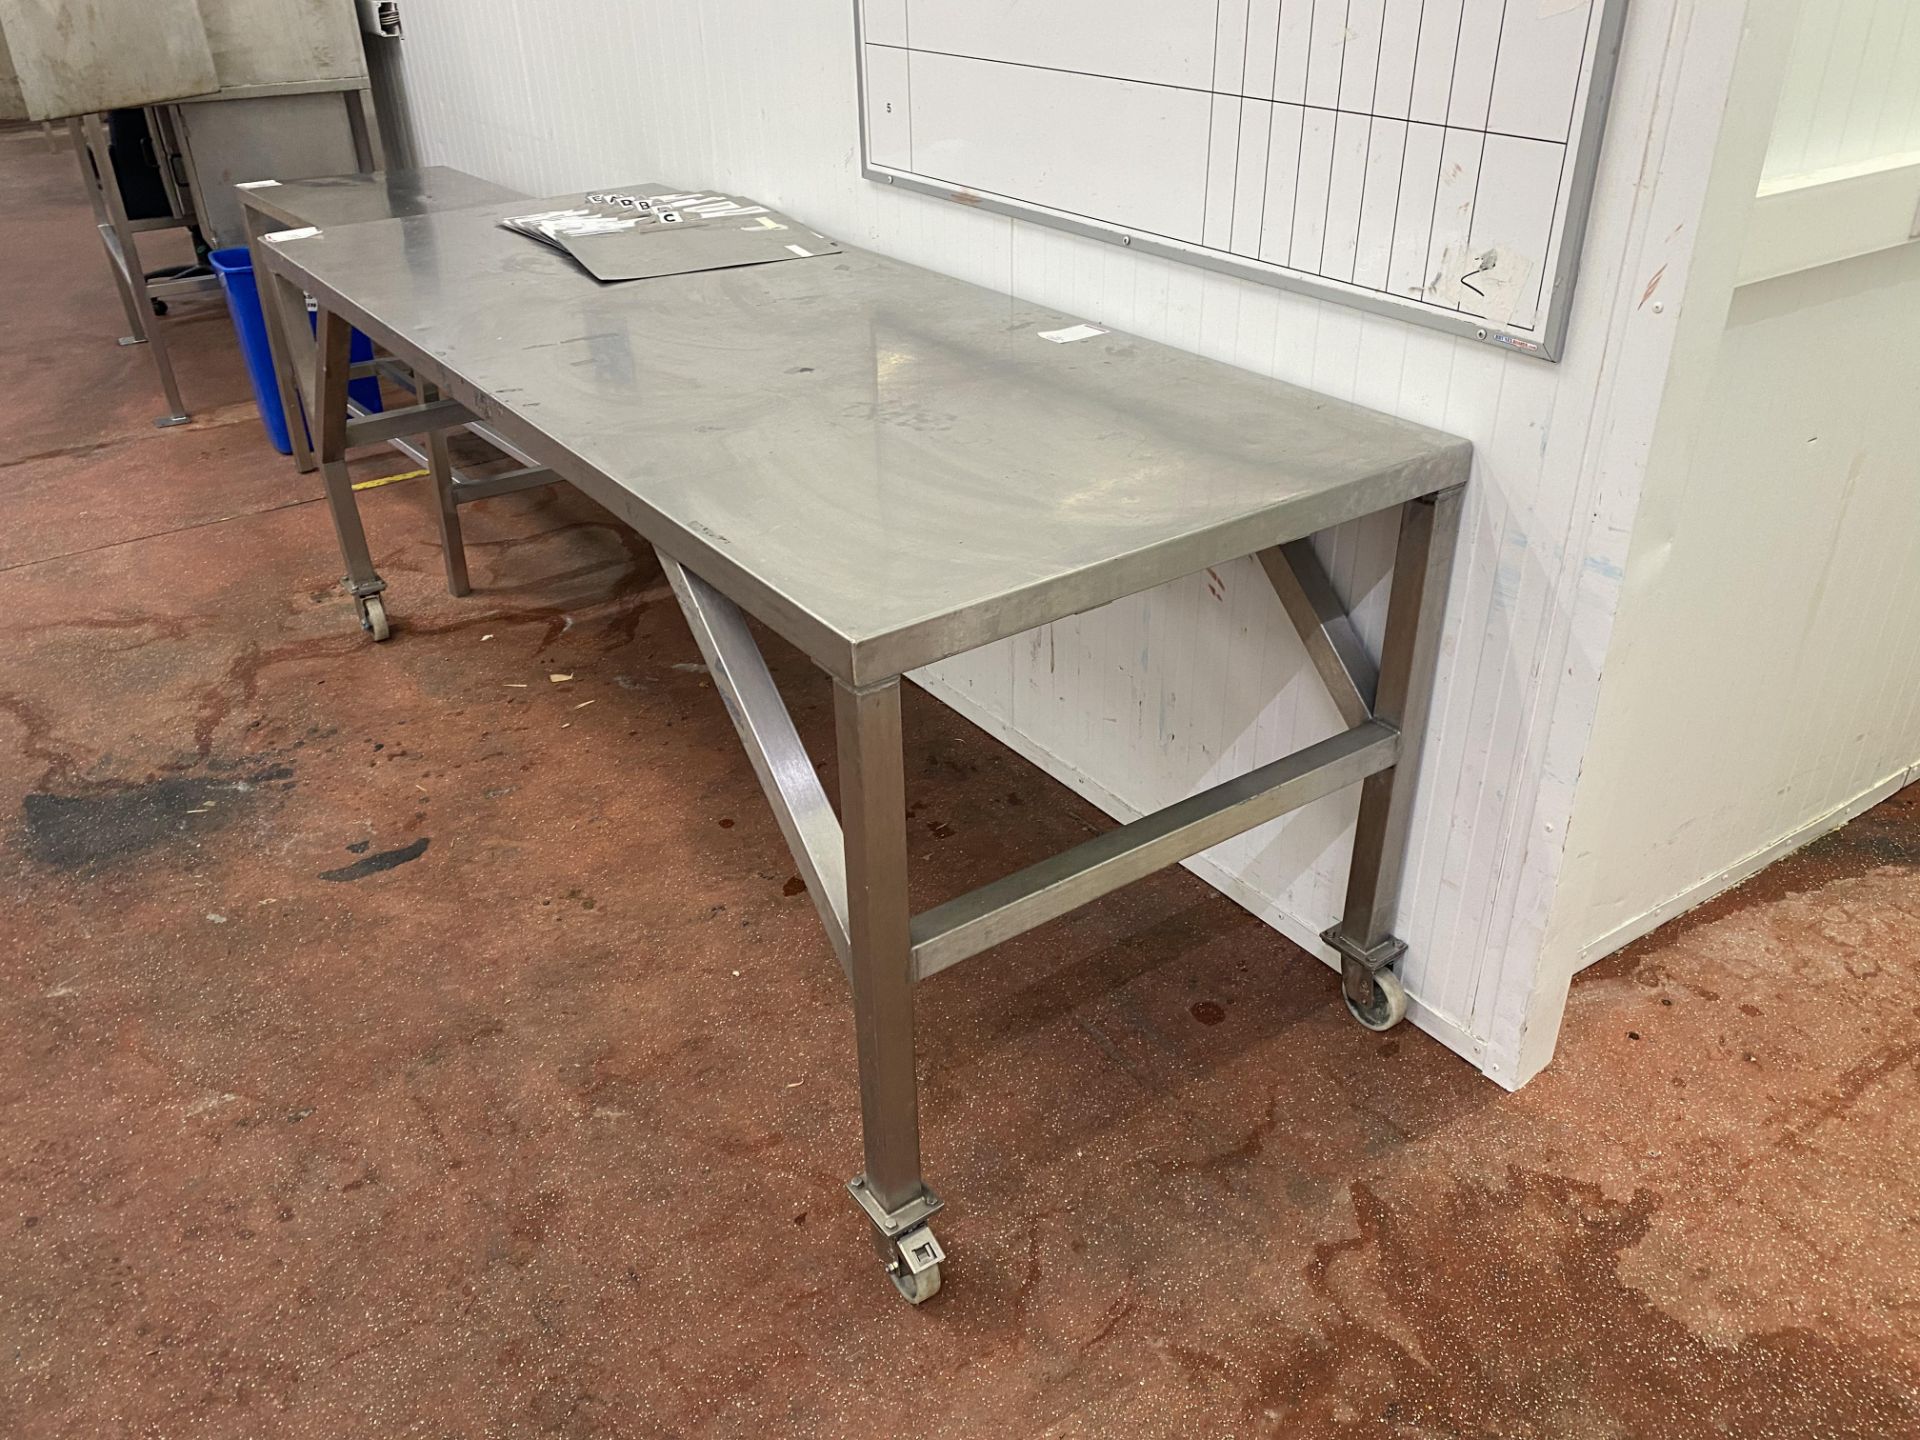 Mobile stainless steel preparation table - Image 2 of 2